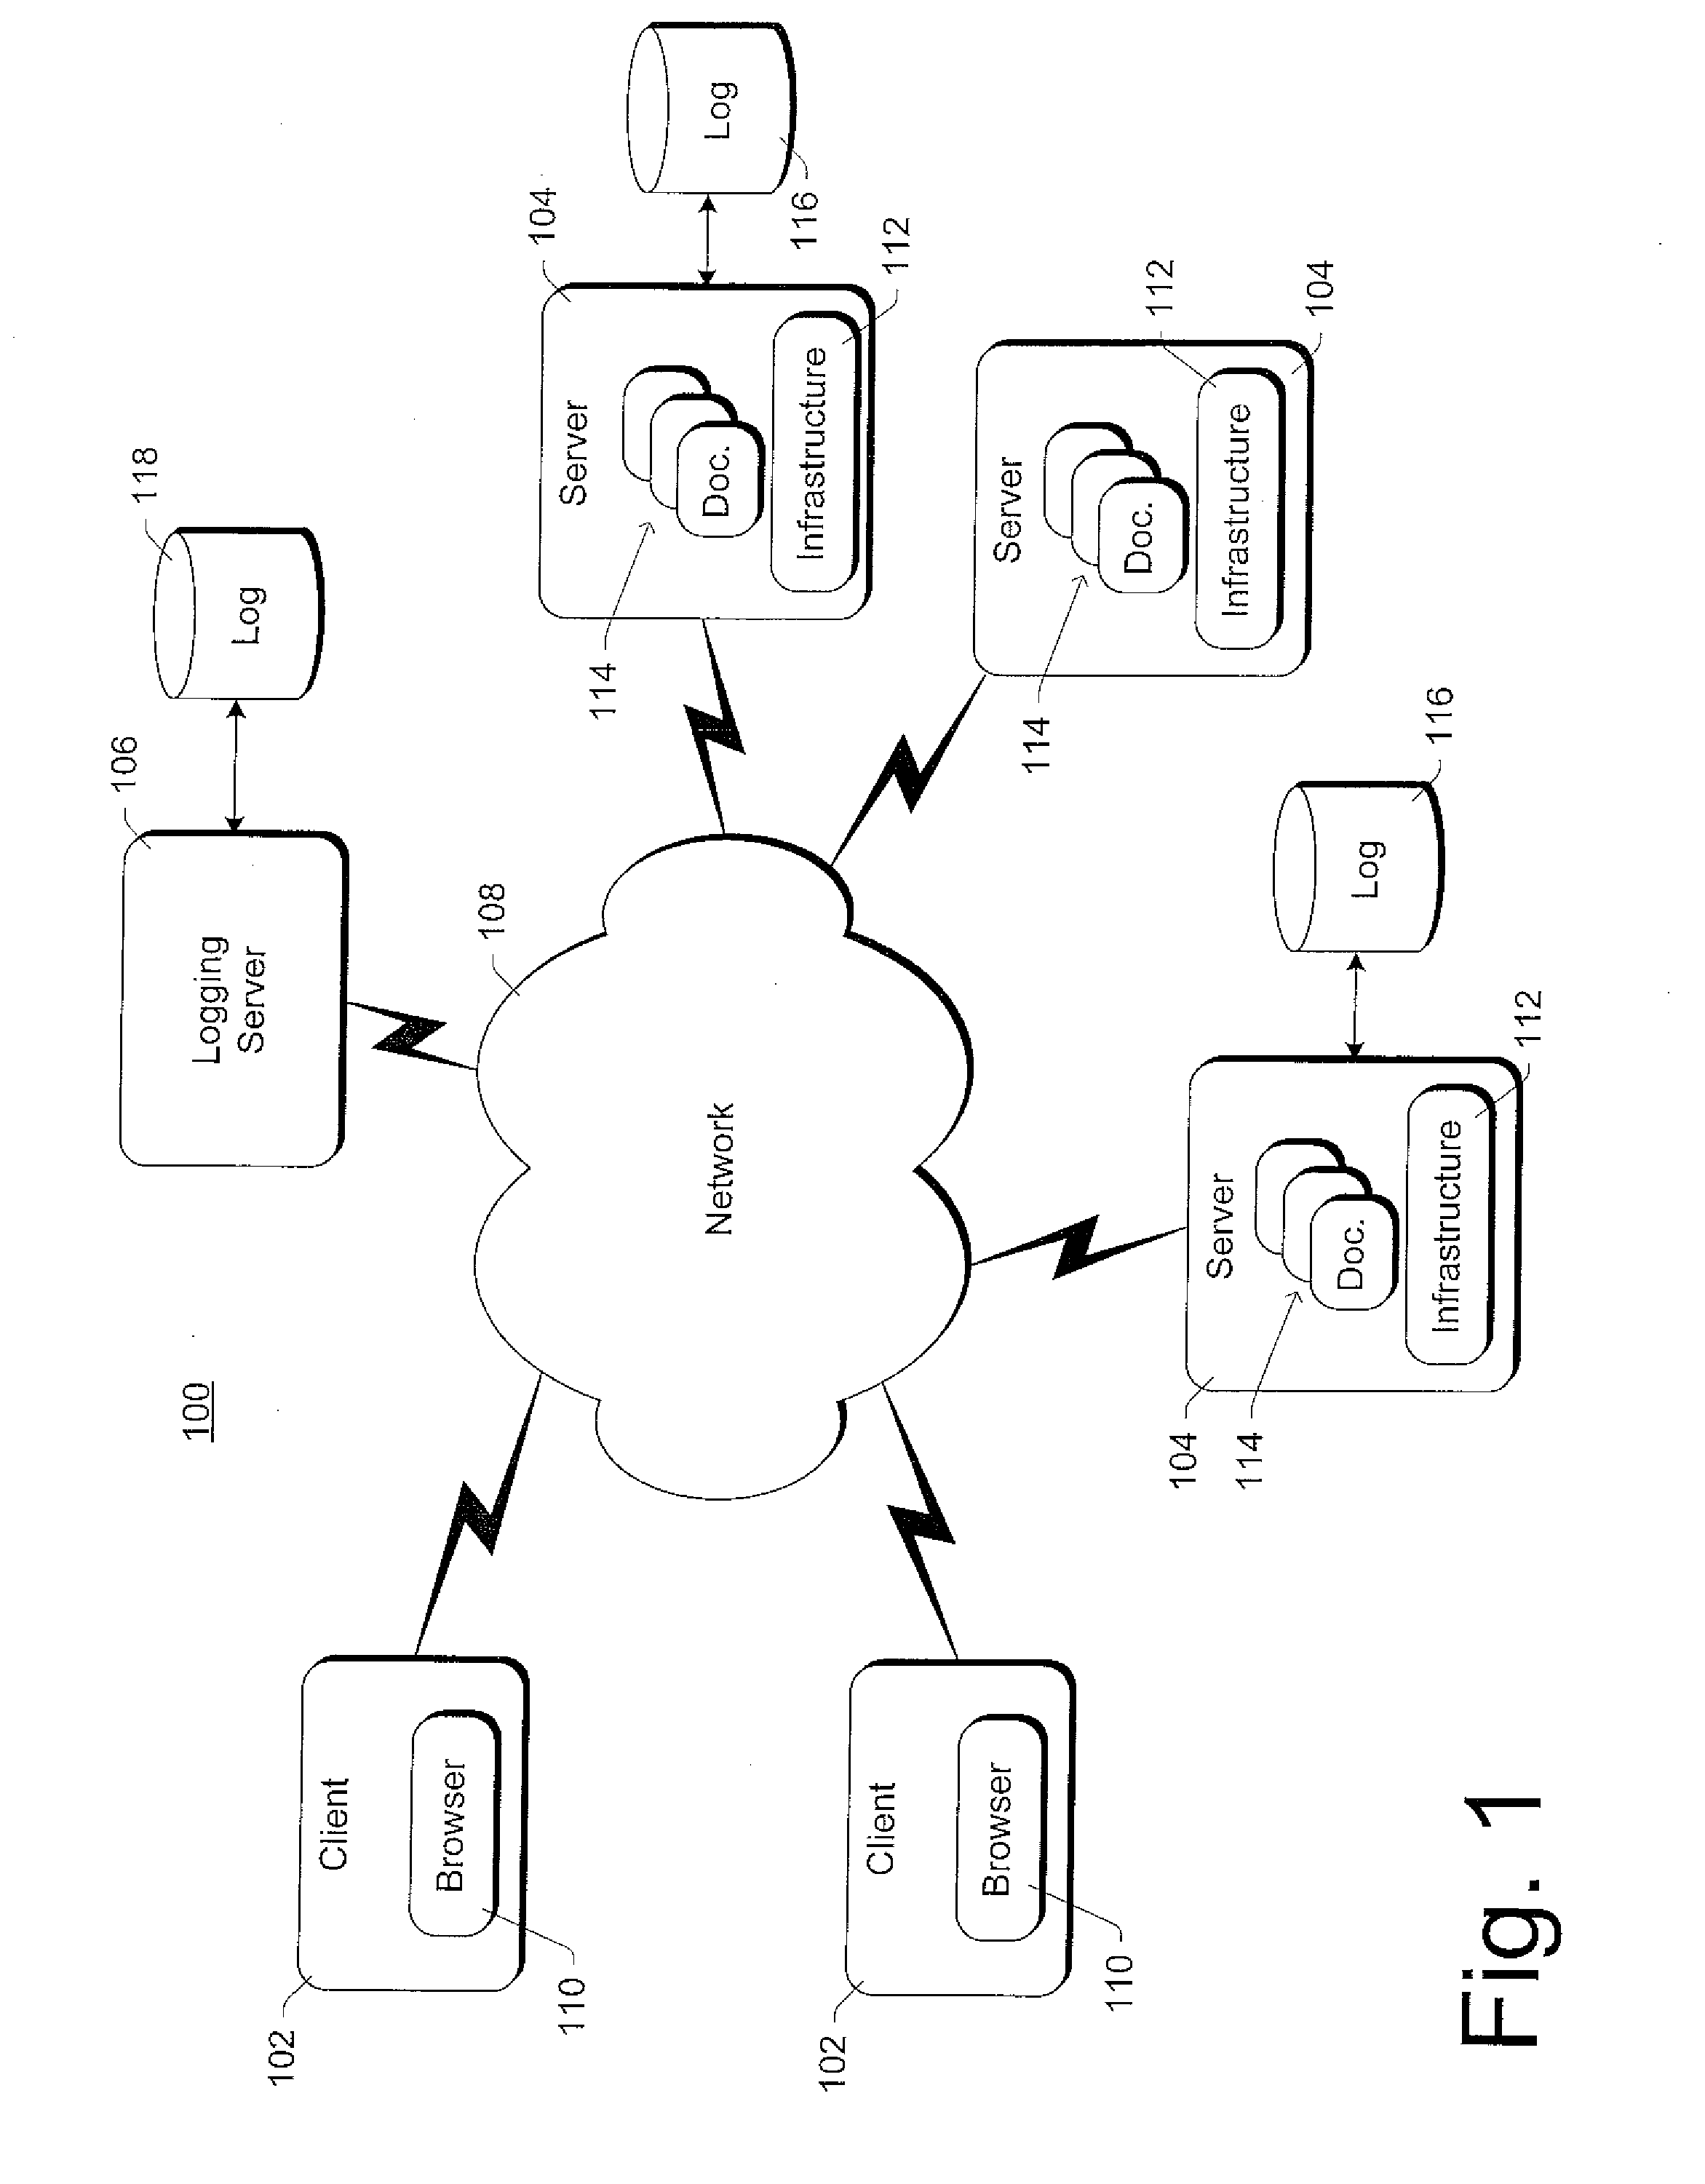 Method and system for providing centralized web usage tracking